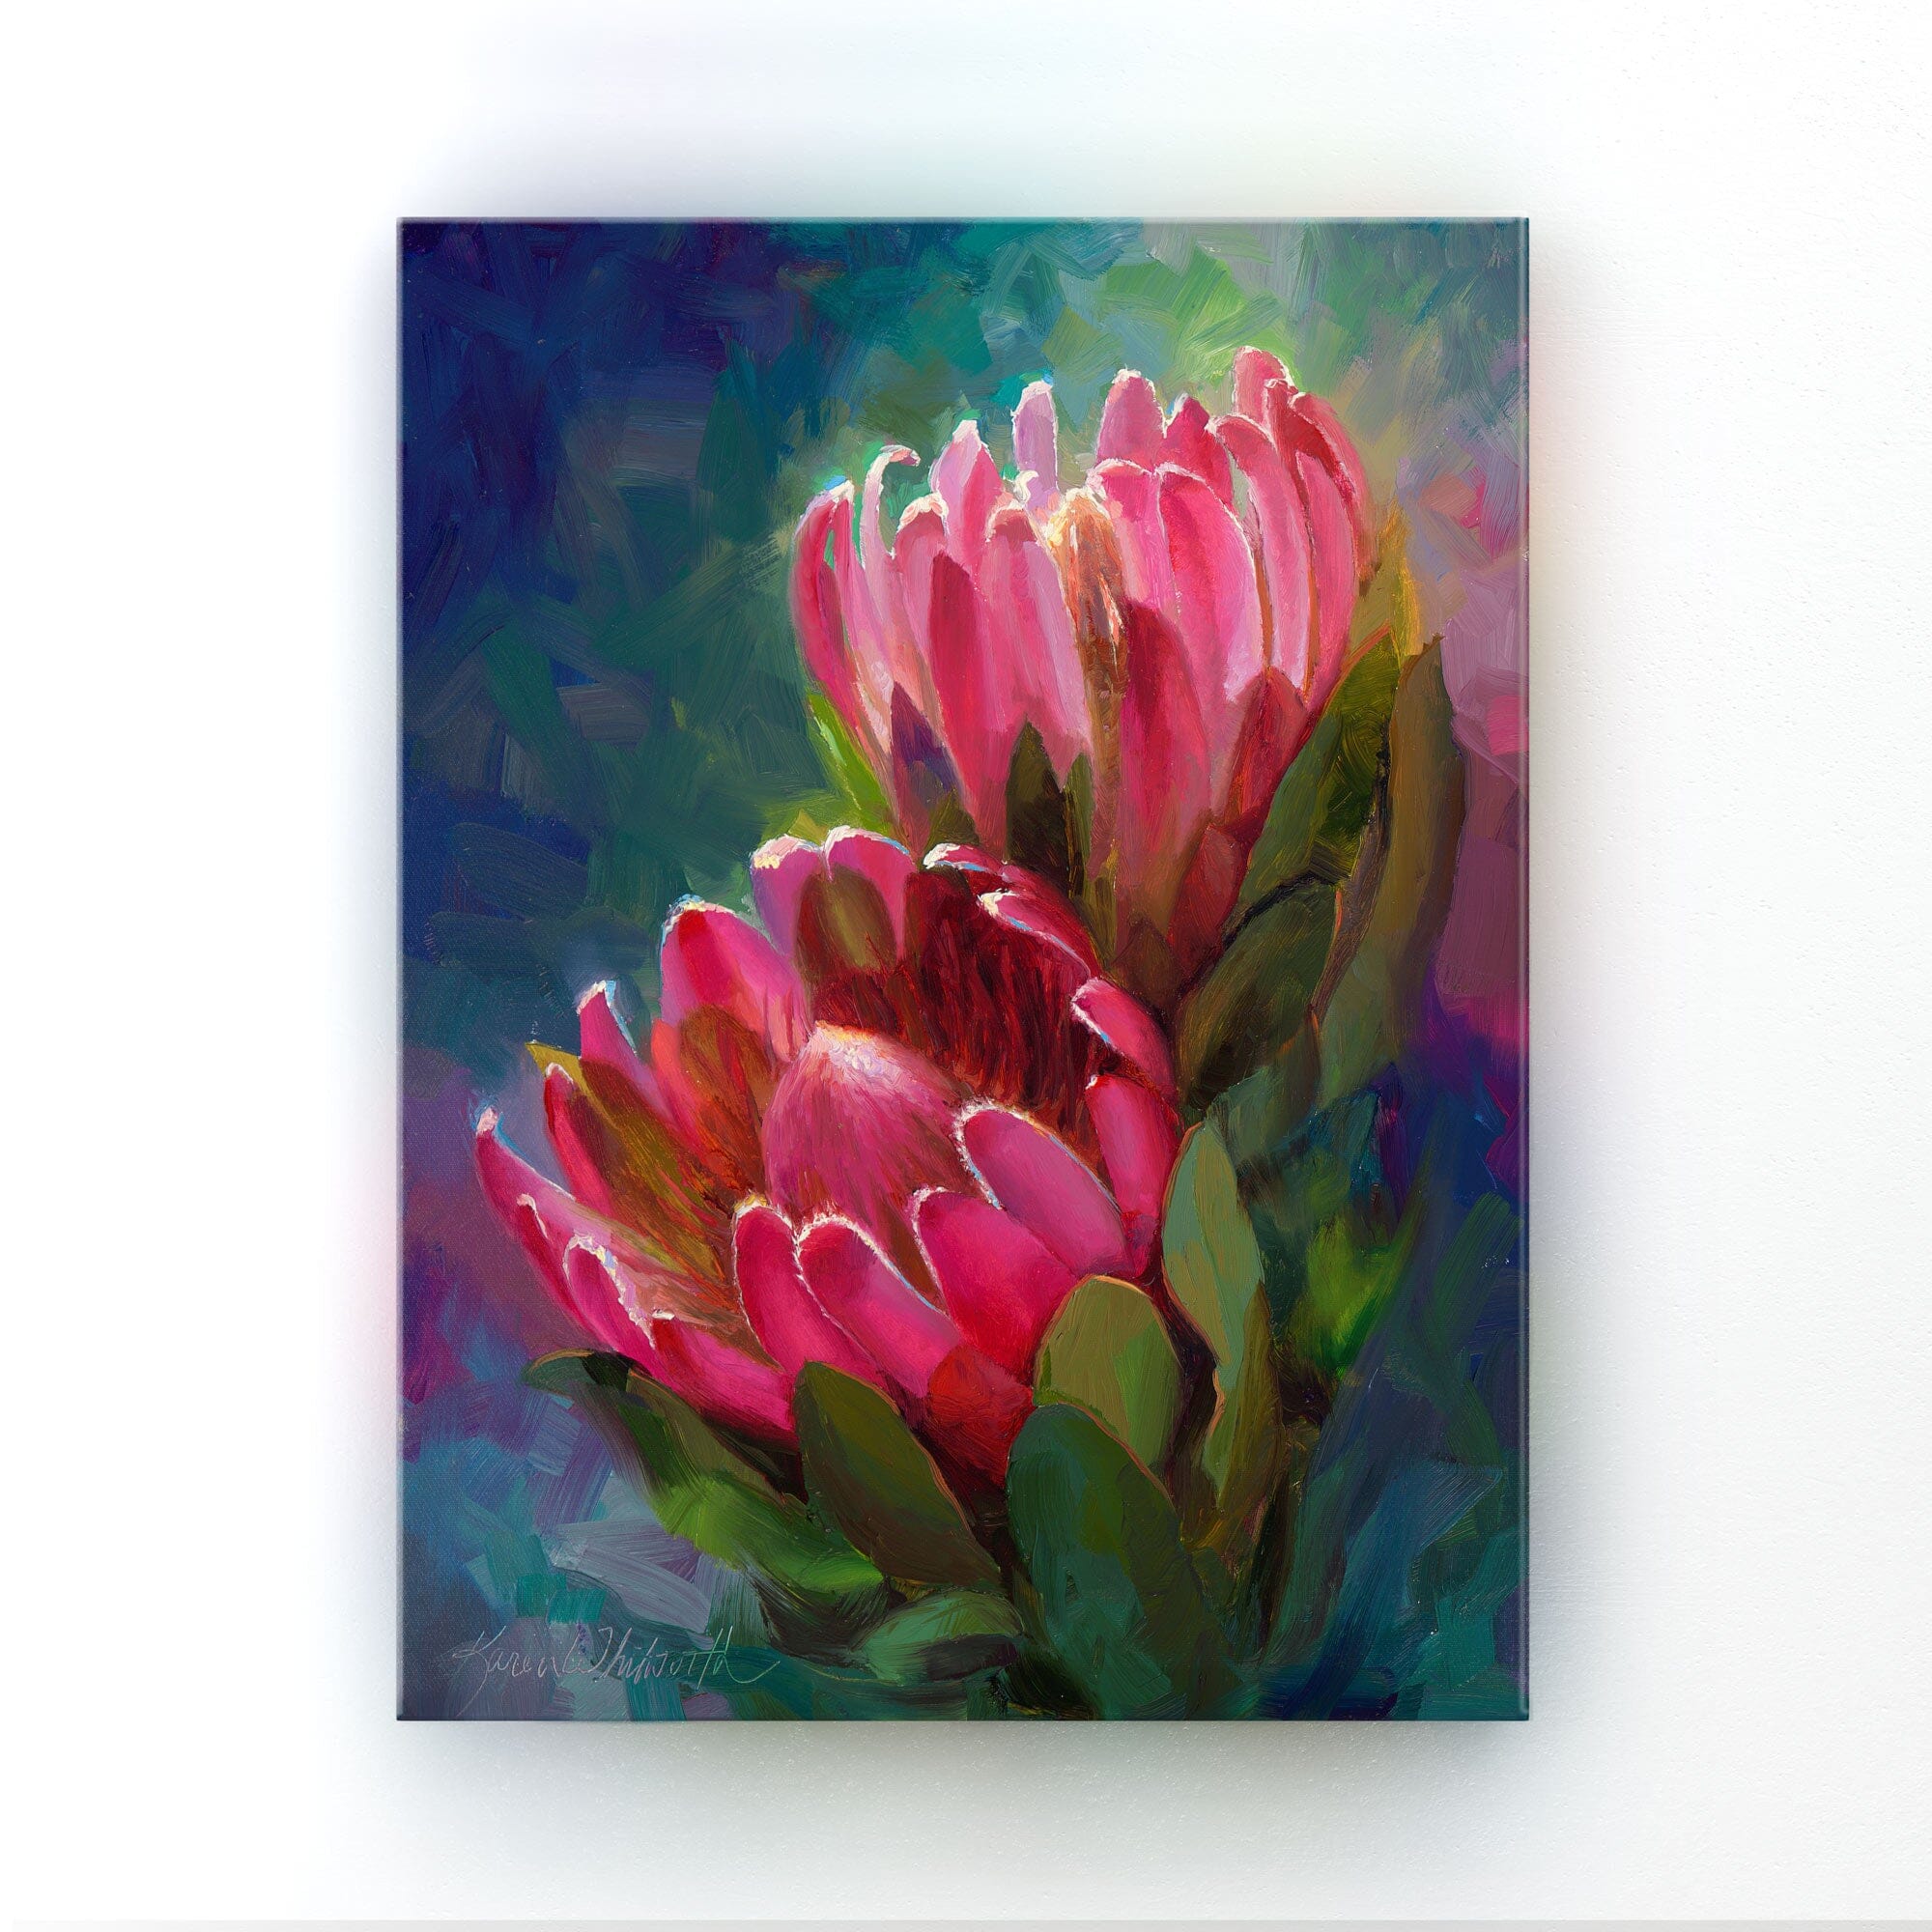 Protea canvas art of tropical pink flowers by floral artist Karen Whitworth. The artwork is hanging on a white wall. 